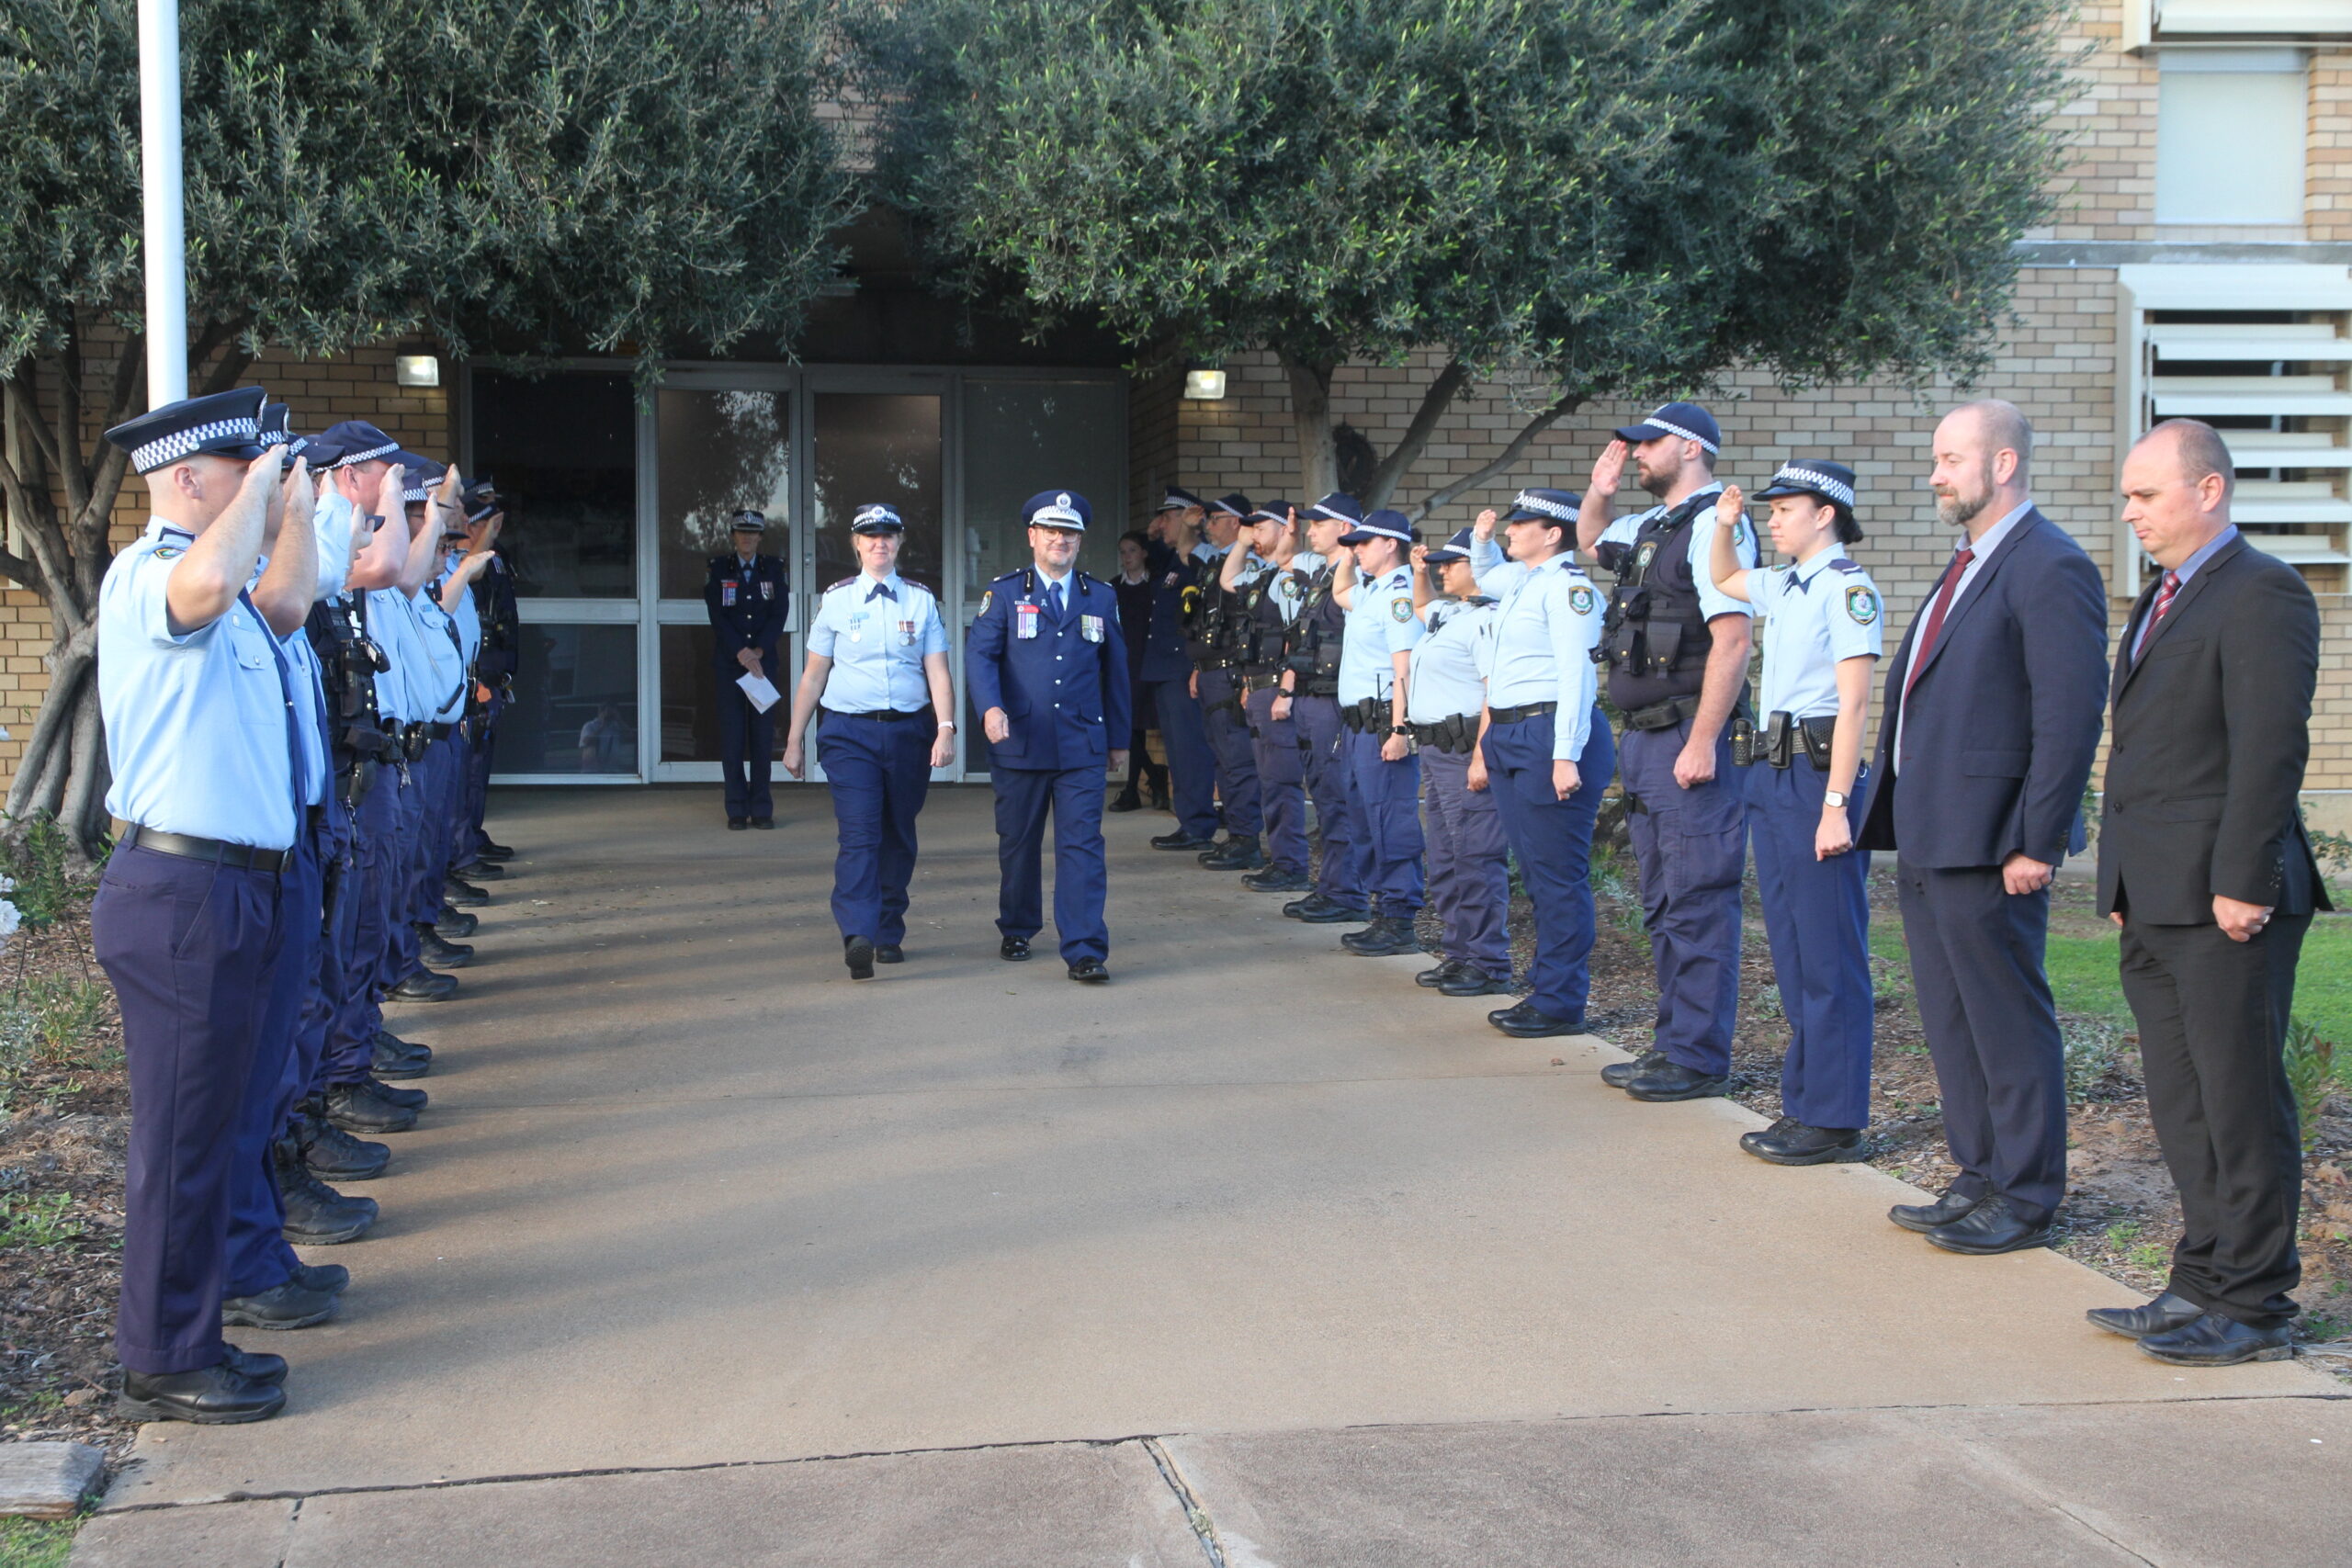 March out marks end of 23 years’ service to NSW Police